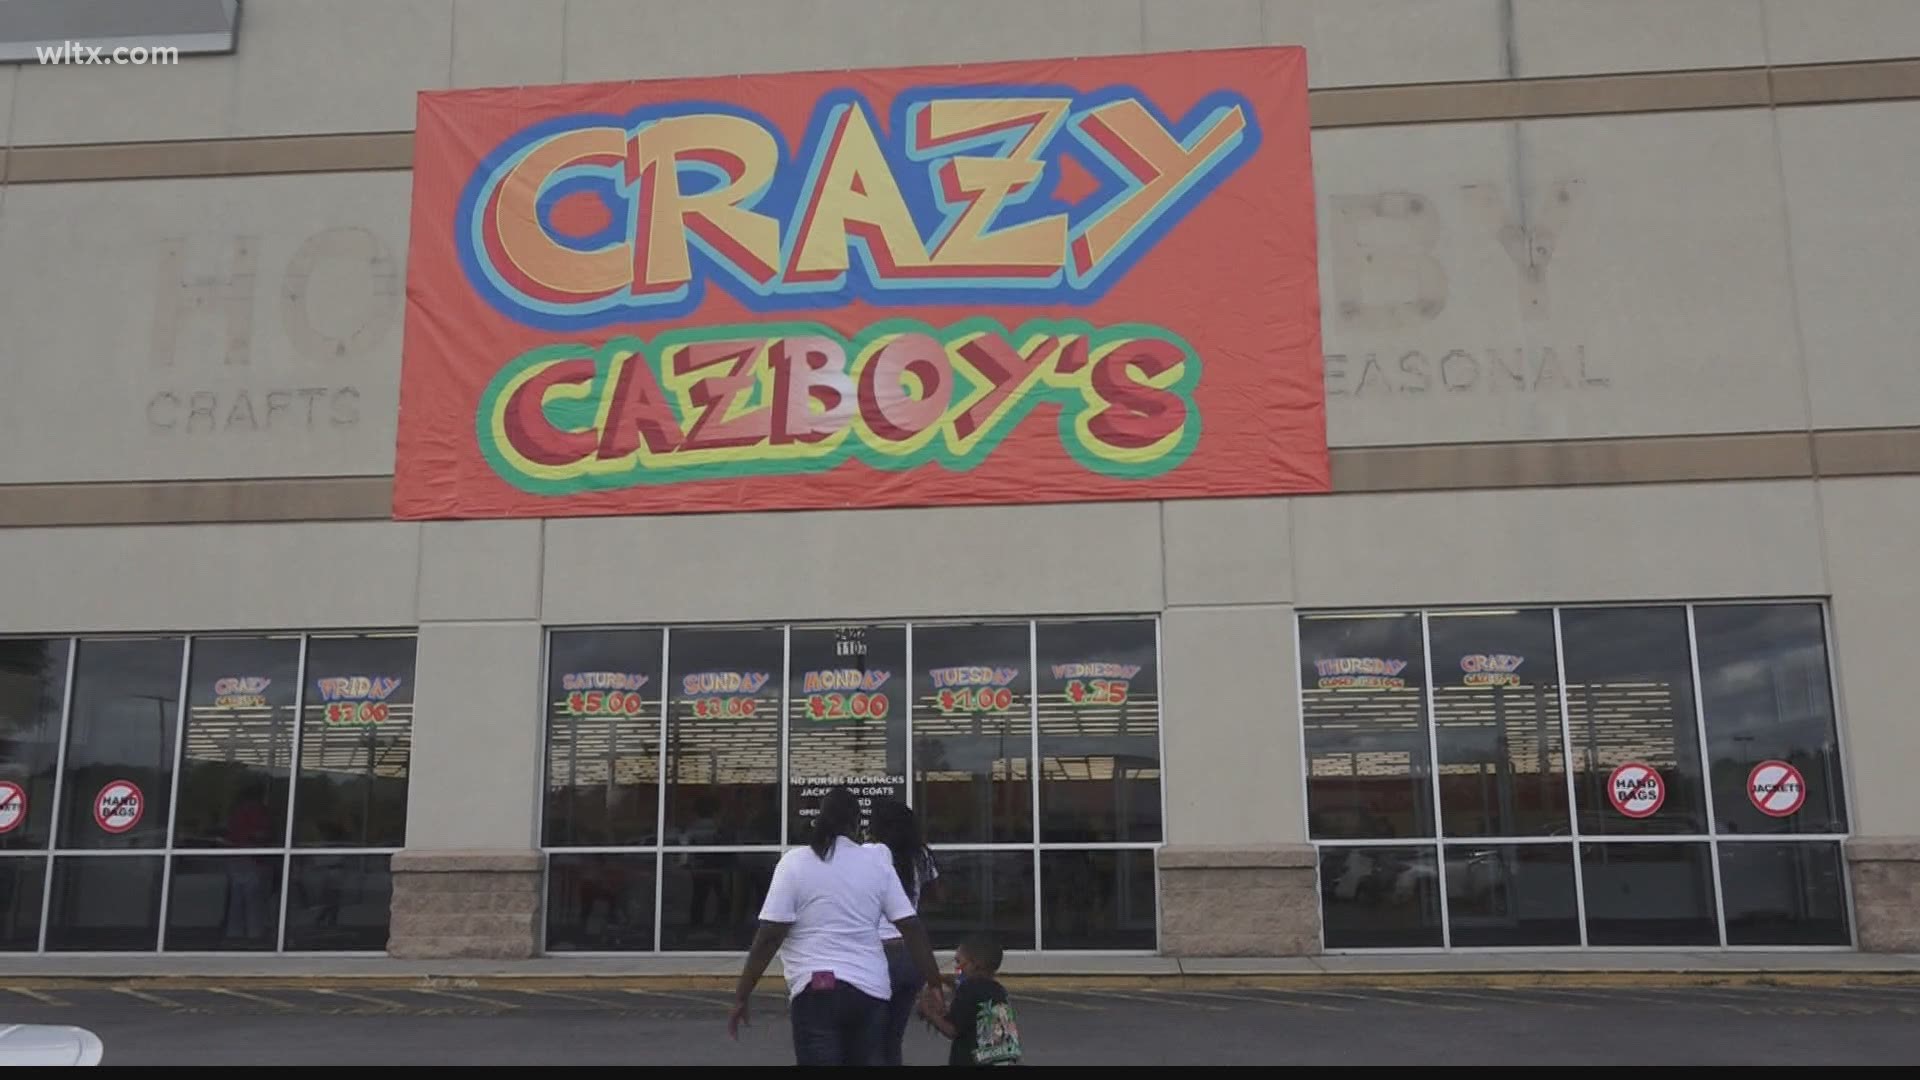 A new discount retail store called Crazy Cazboy's just opened in Columbia, and it has customers buzzing.